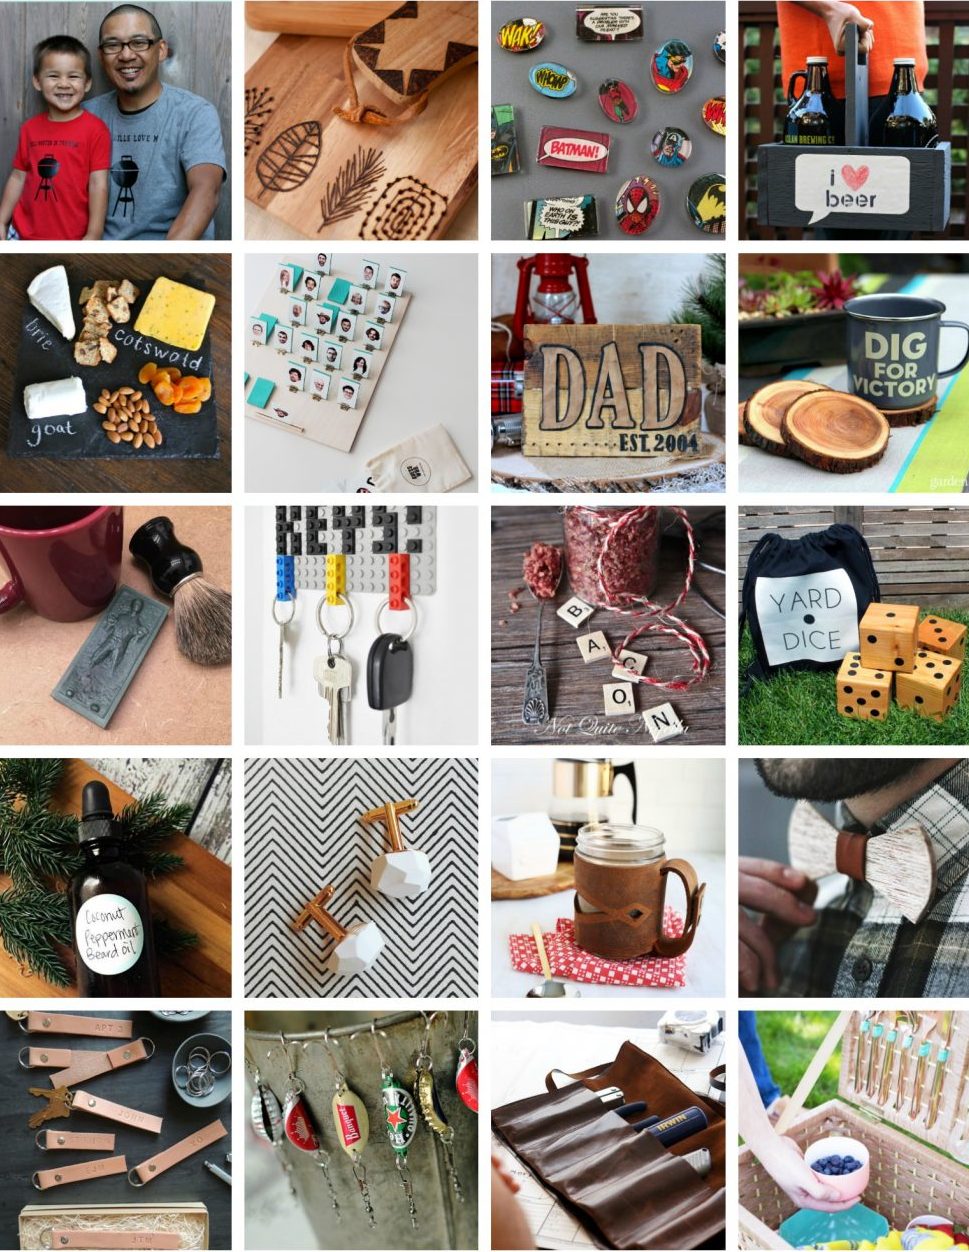 37+ Handmade Gift Ideas For Dads (many of which take 60 minutes or less to make!) From bbq, bacon and beer, to comics, woodwork and family fun. We have you covered with gifts men will love! 